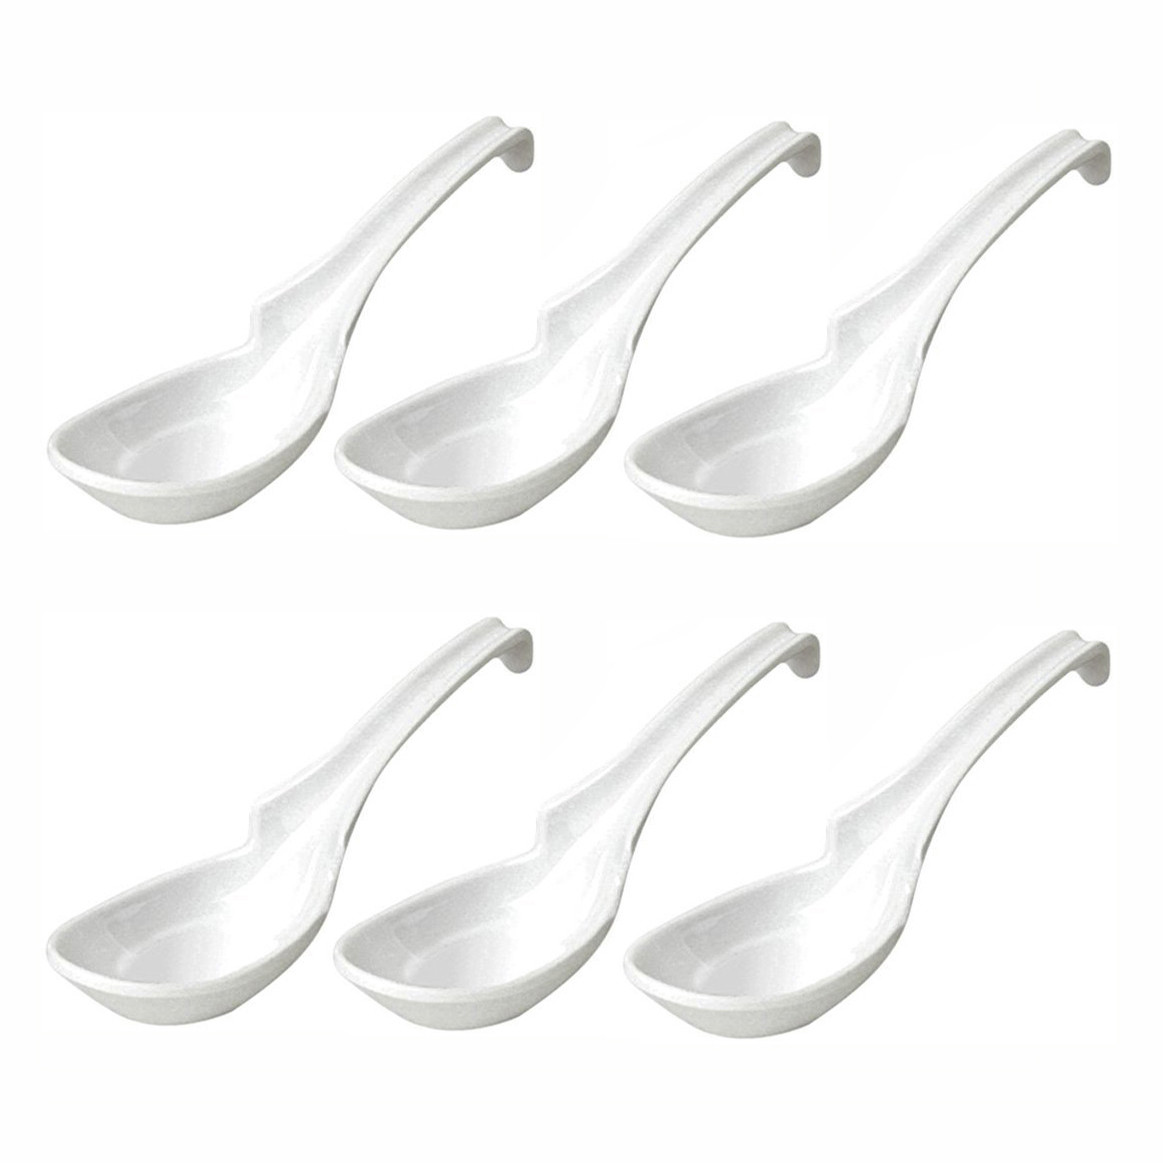 Set of 6 Chinese Soup Spoons Asian Korean Japanese Wonton Soba Rice Pho  Ramen Noodle Spoon Notch and Hook Ladle Style Spoons, White - Japan Bargain  Inc